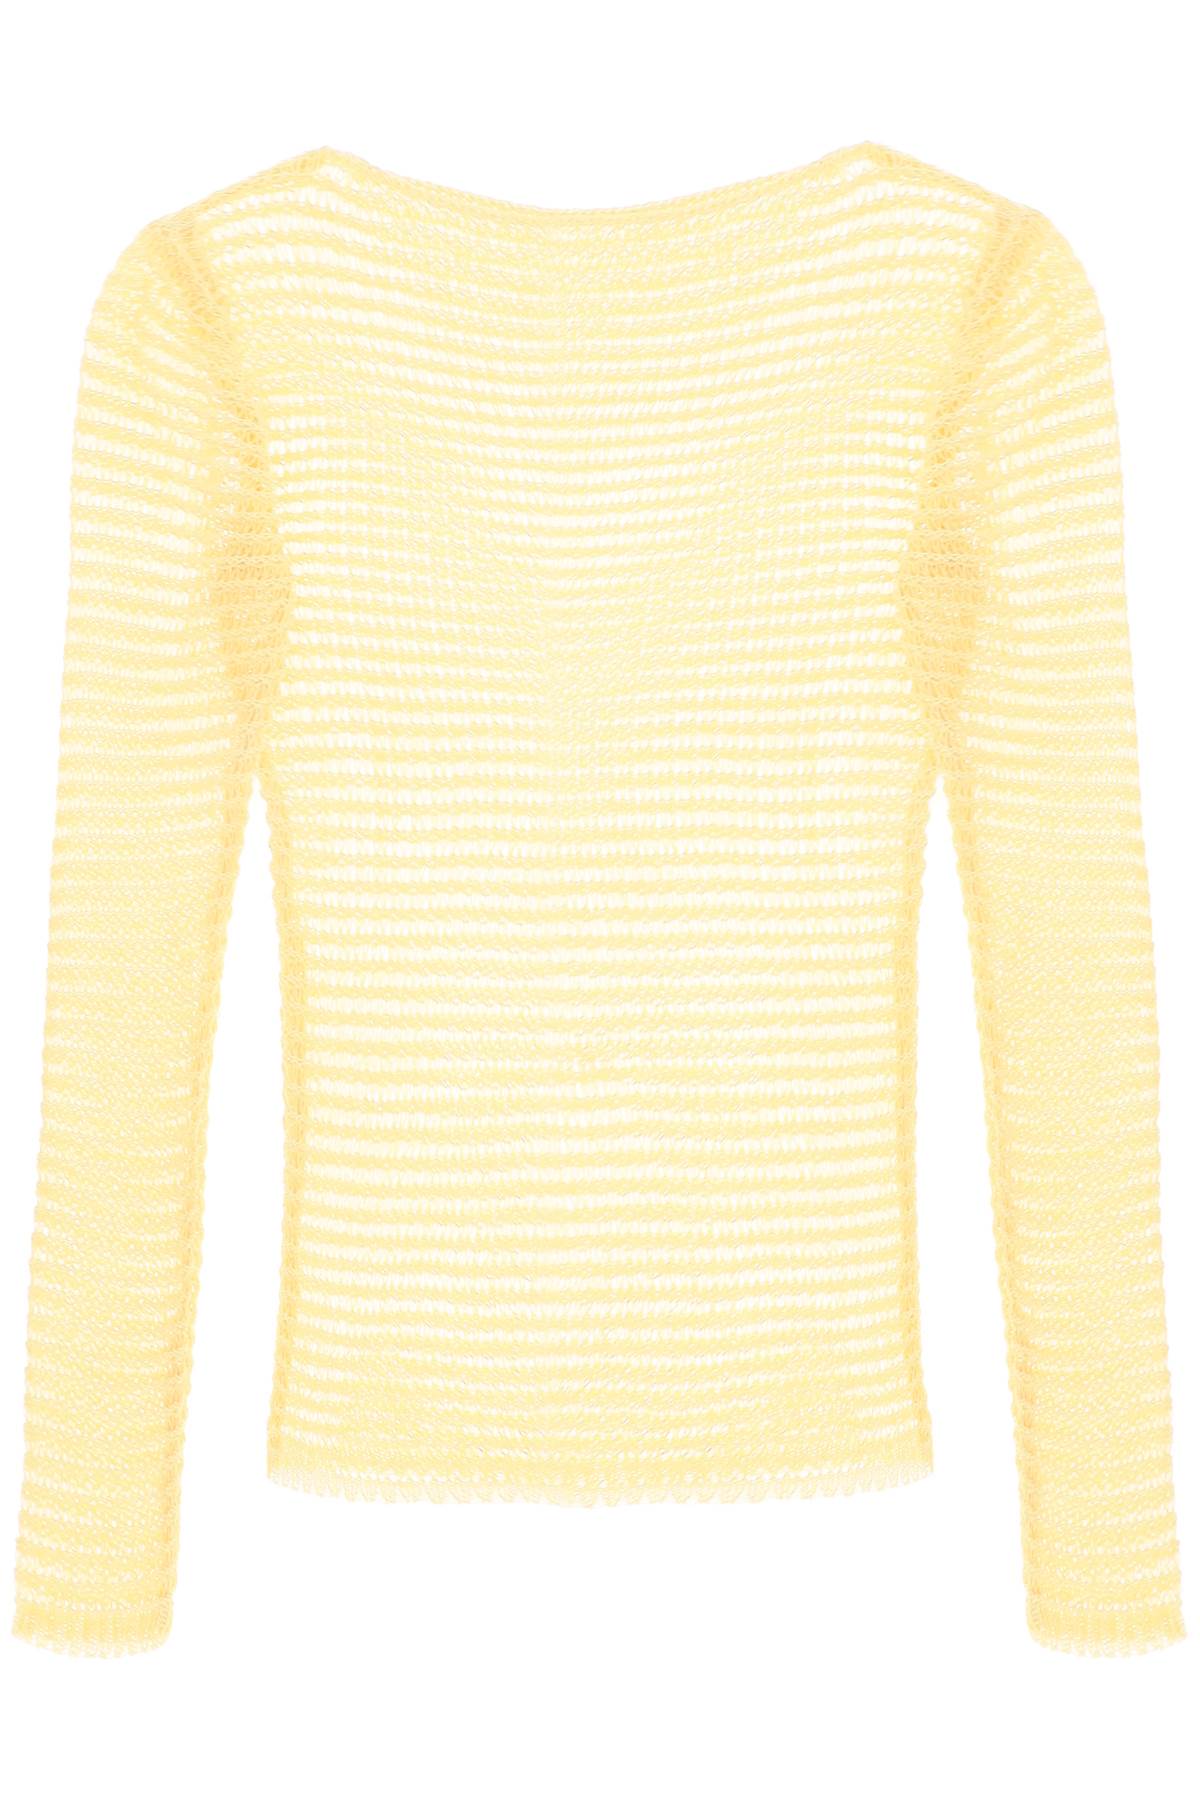 Paloma Wool Replace With Double Quotetaxi Mesh Perforated   Yellow